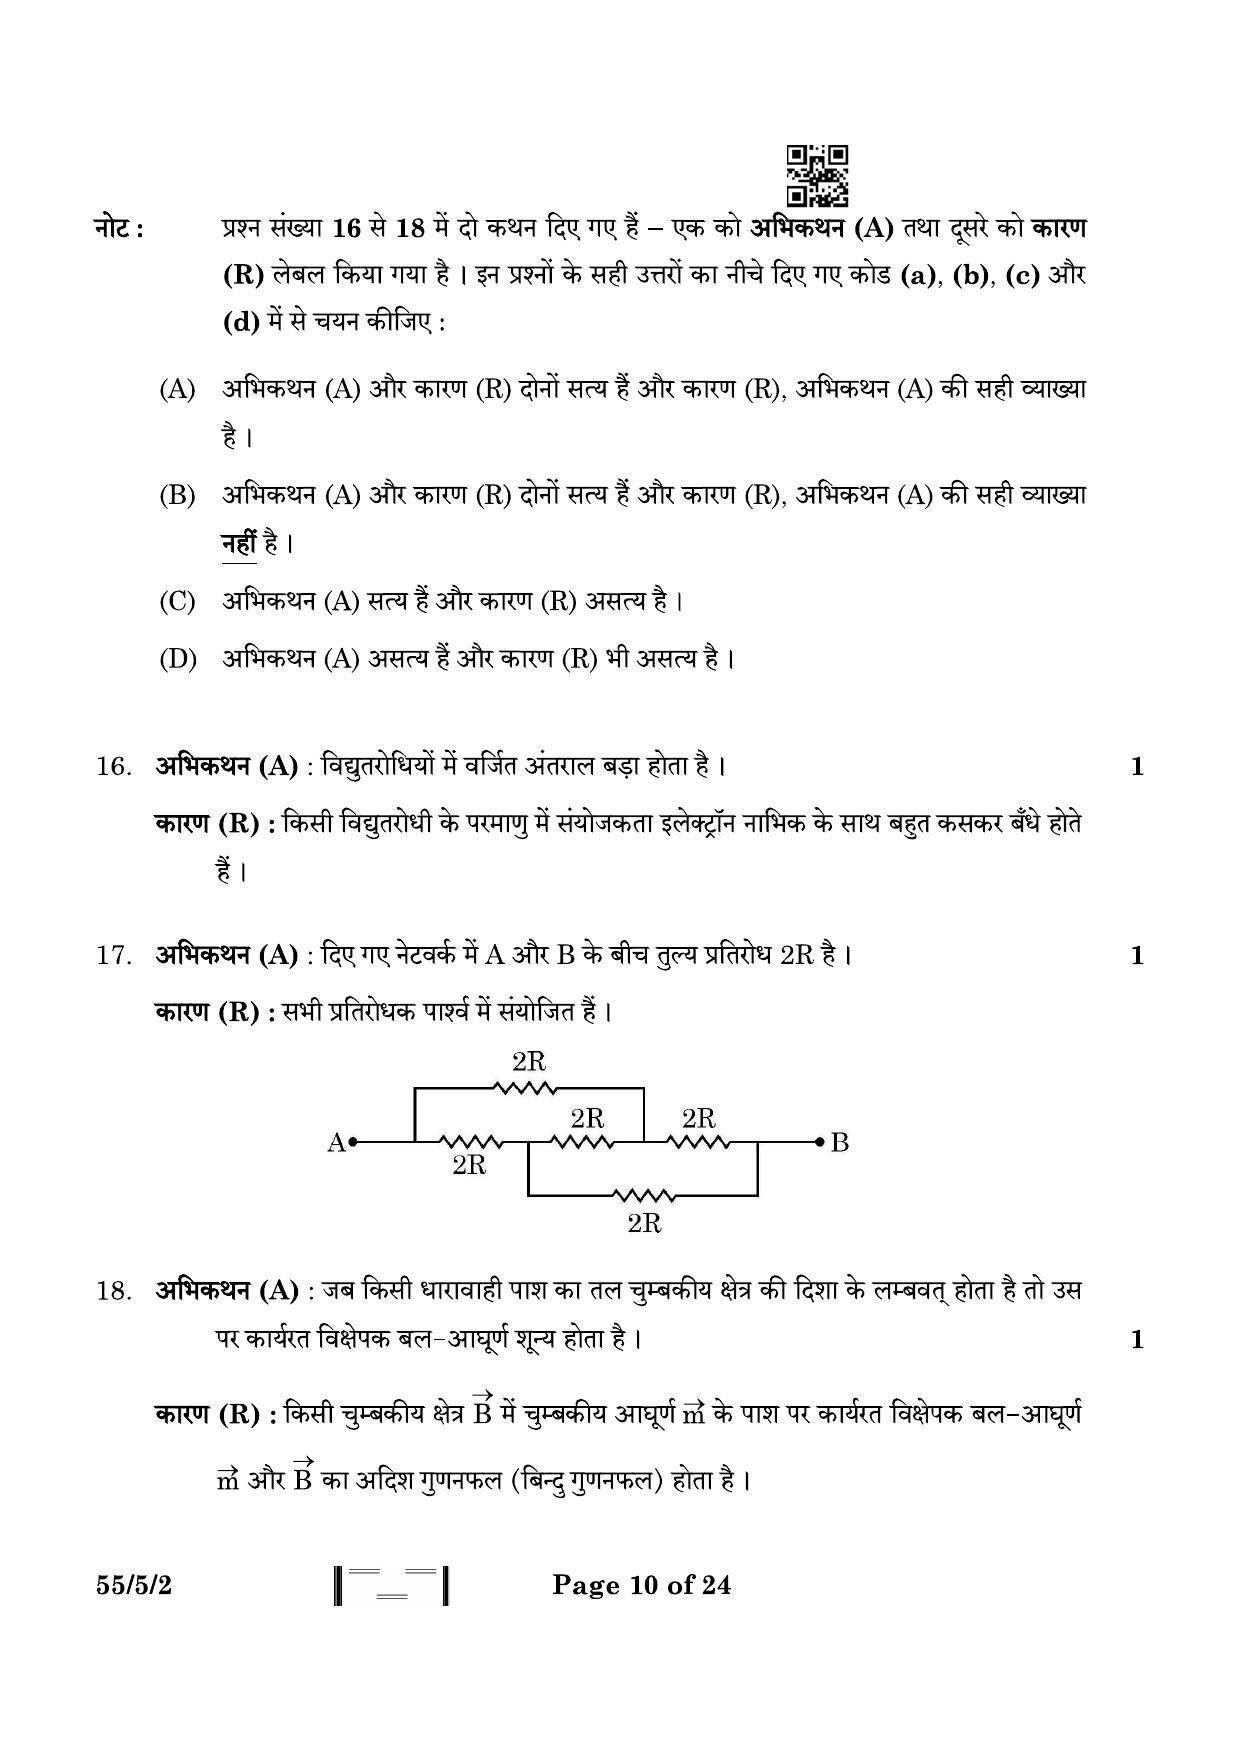 CBSE Class 12 55-5-2 Physics 2023 Question Paper - Page 10